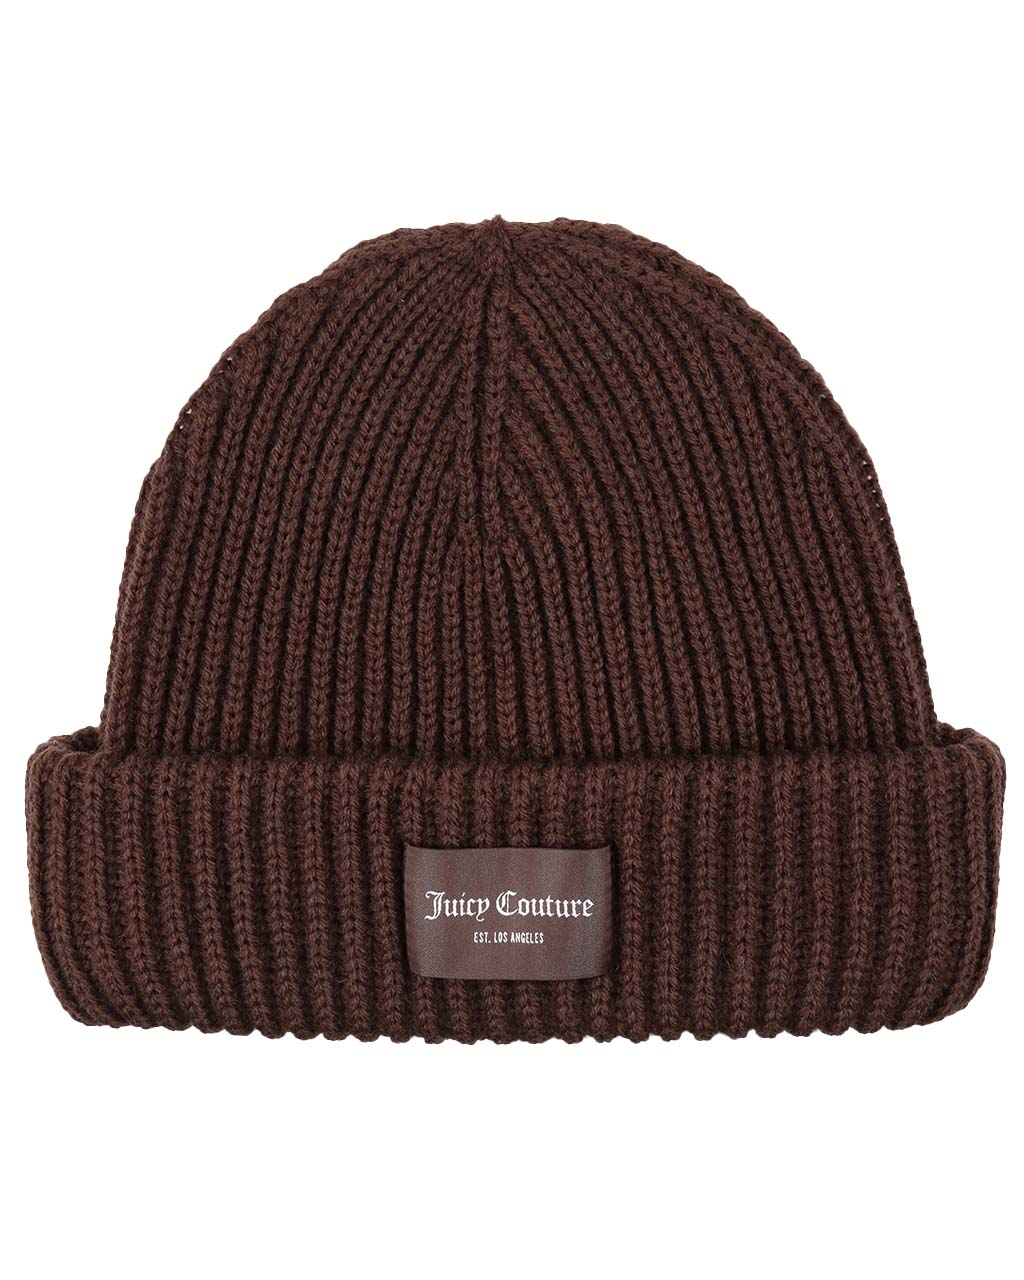 Juicy Couture Malin Chunky Knit Beanie Java